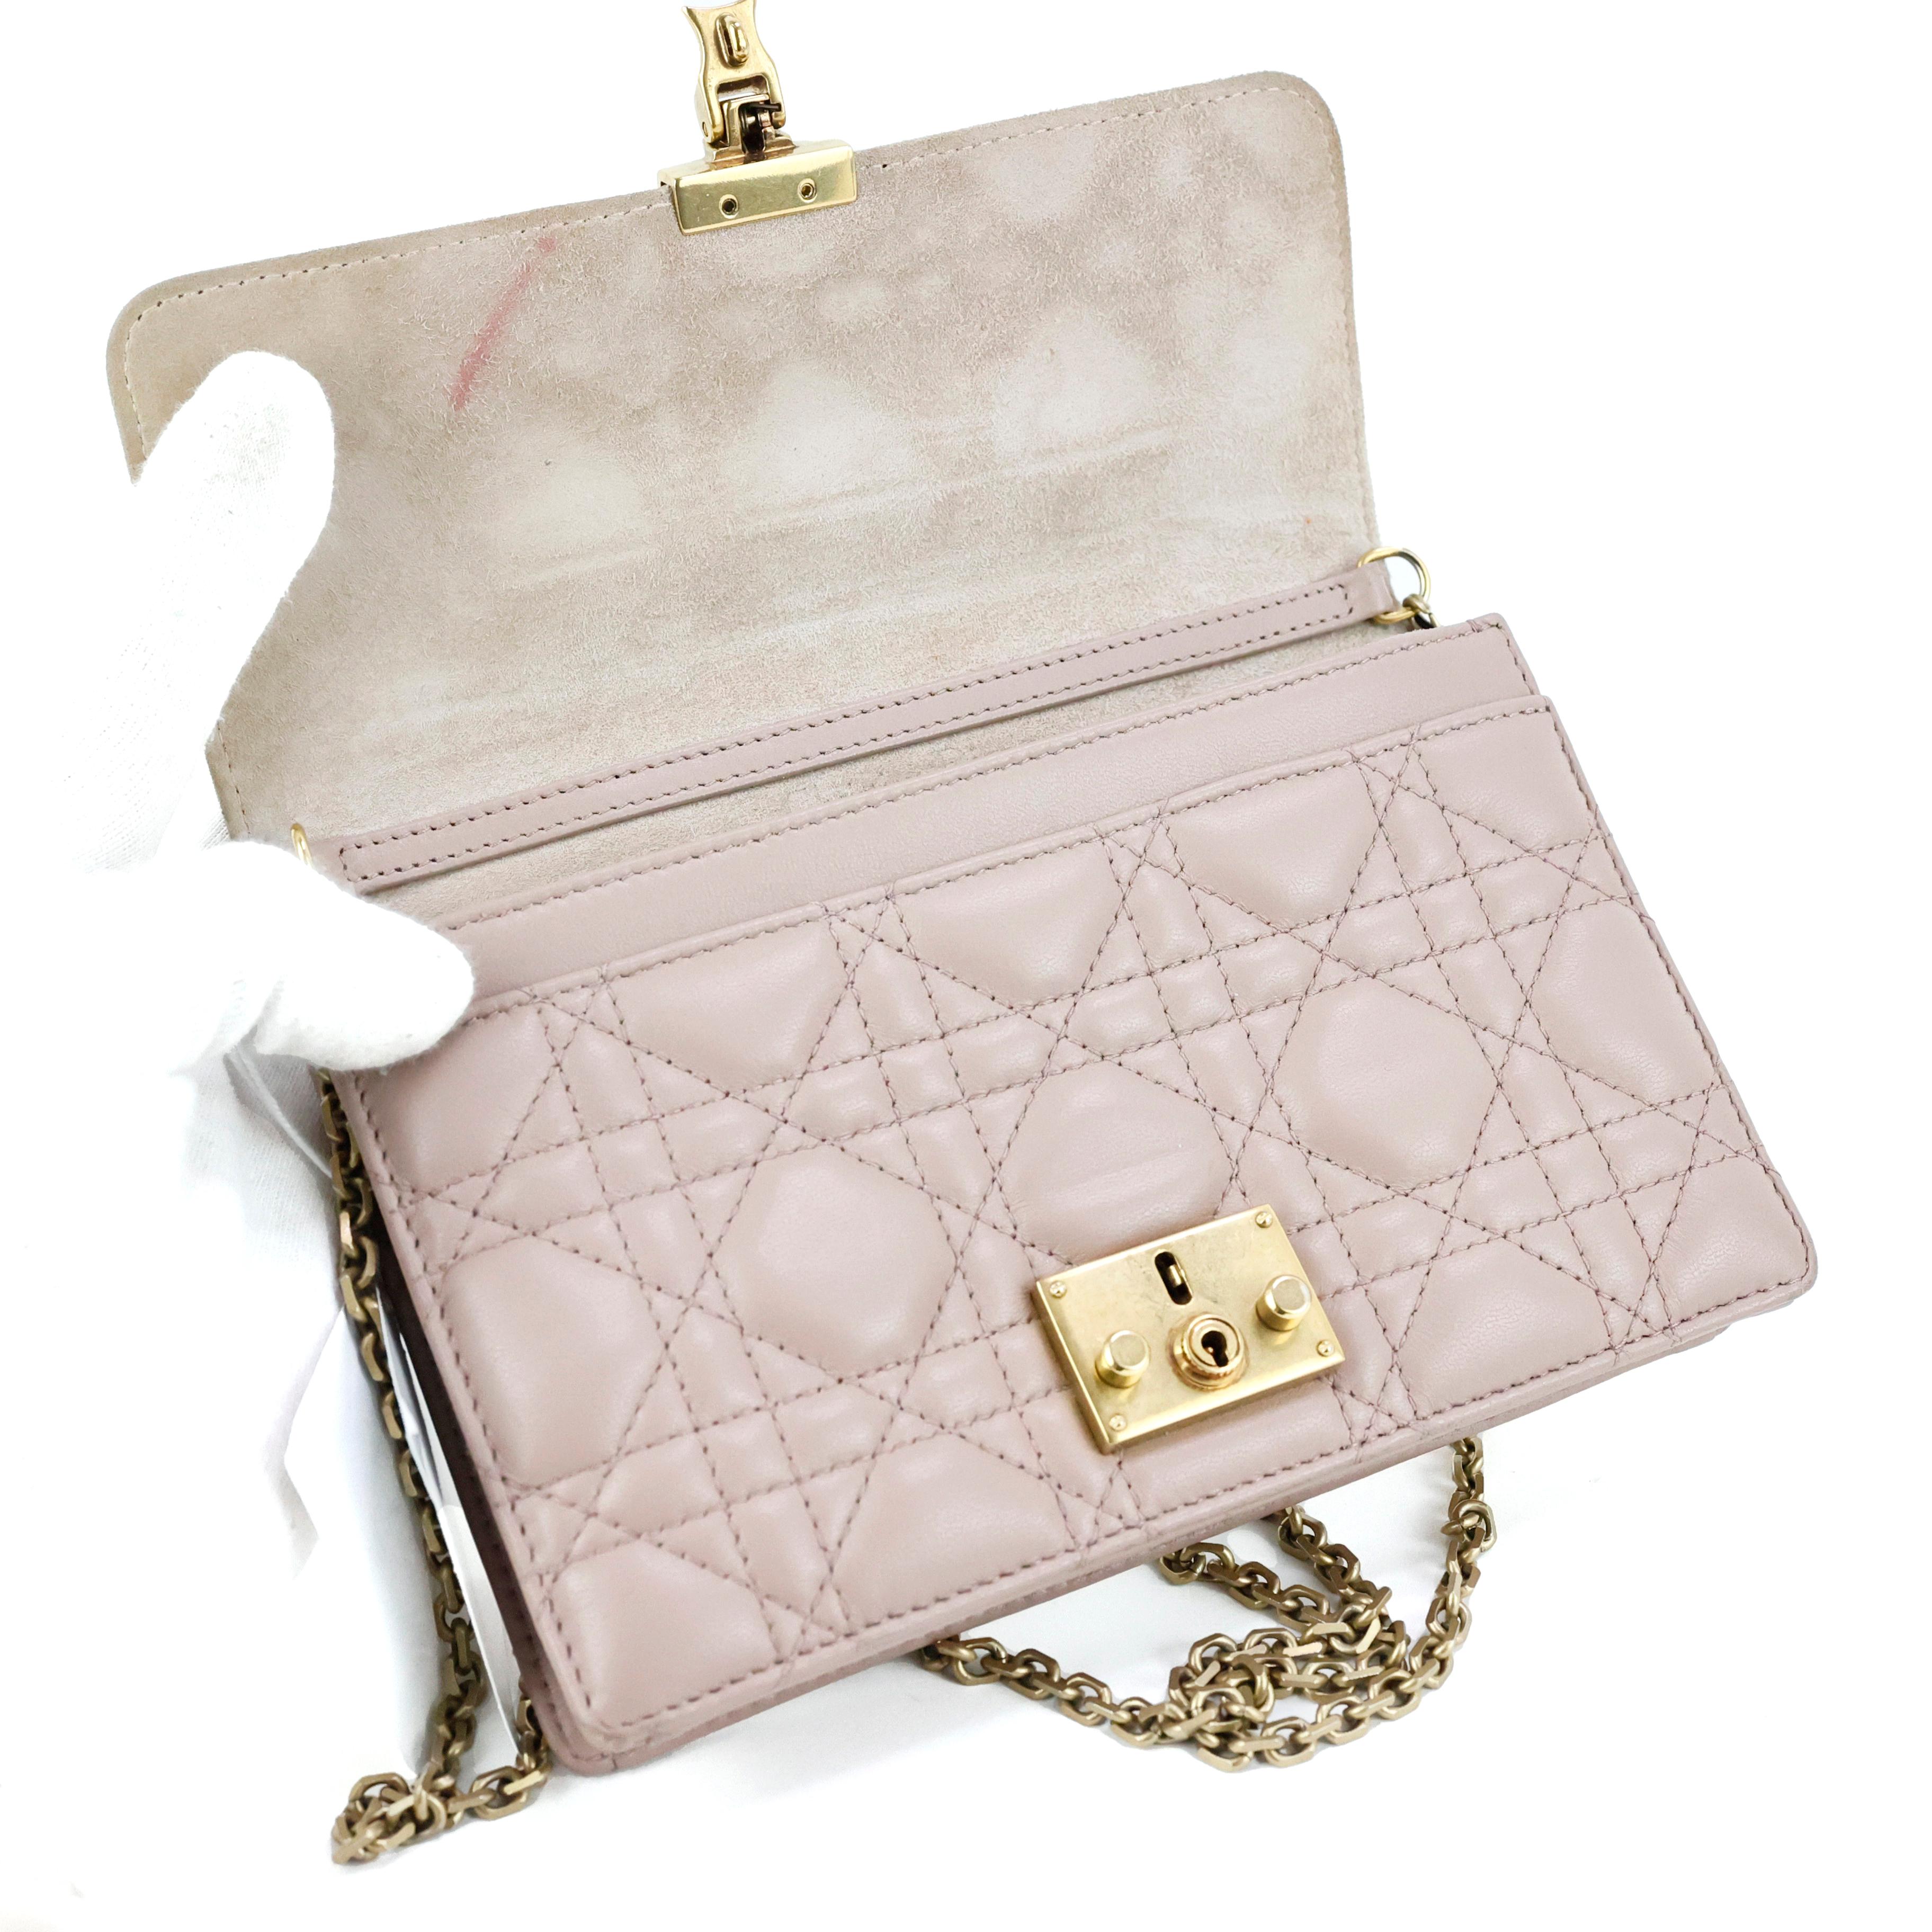 Dior DiorAddict crossbody bag in leather For Sale 3